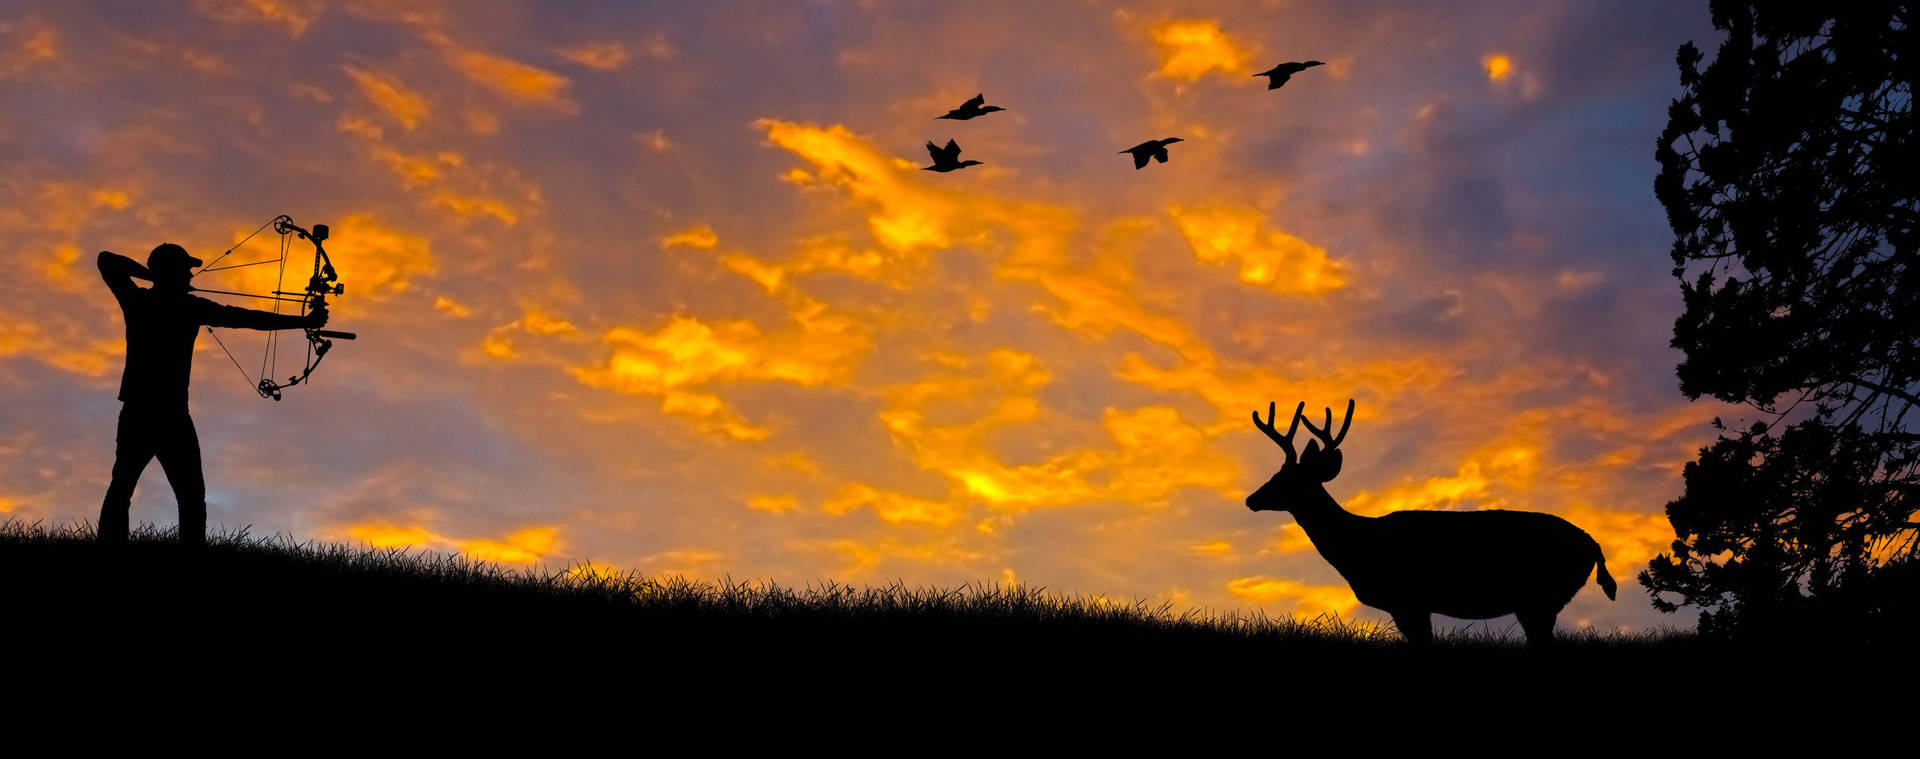 Tracking Down The Trophy Elk At Sunset Background